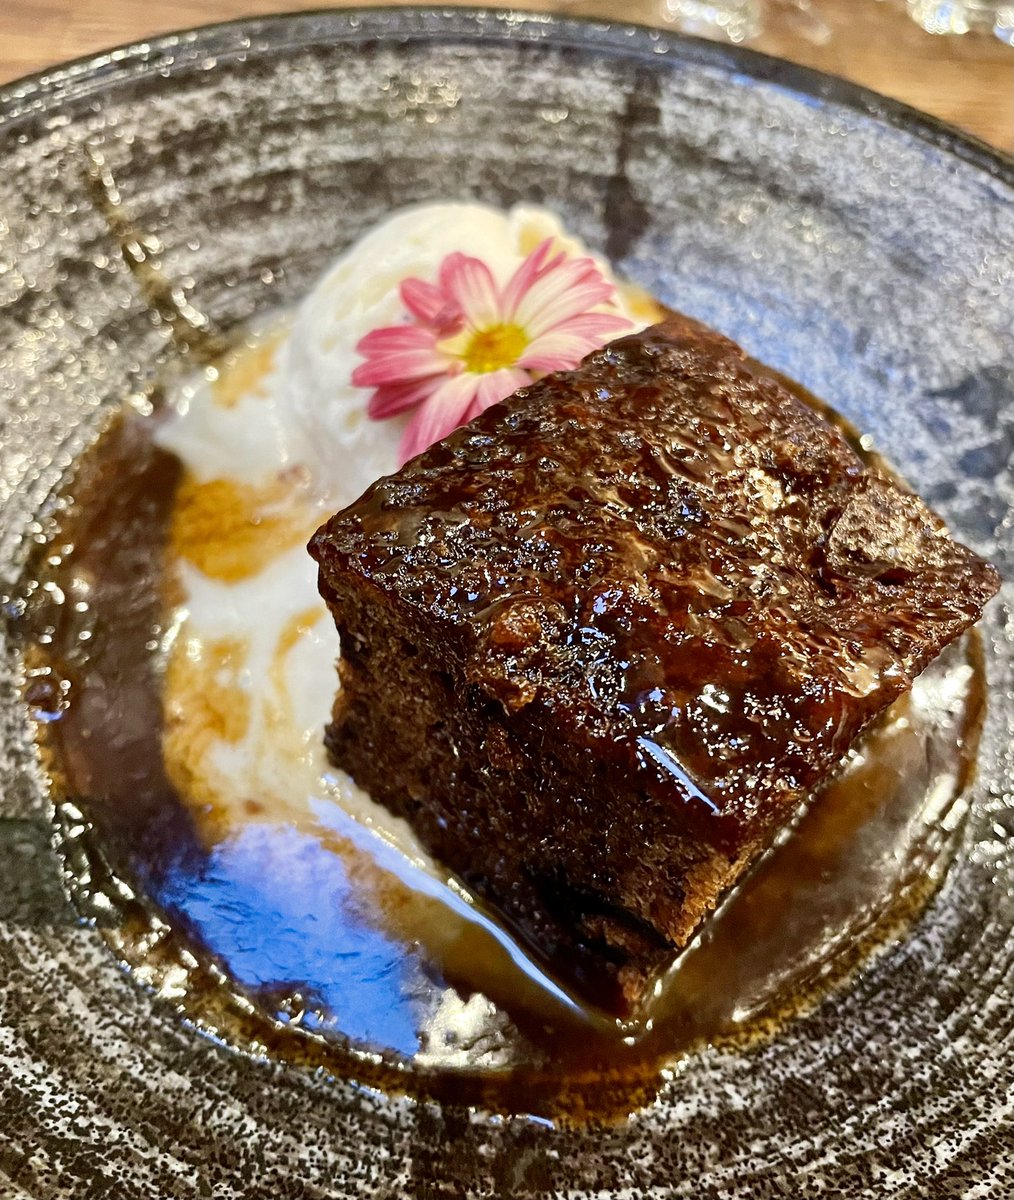 Lovely evening with with @indieyorkmap crew at @ForestYork_. Really delicious food, including a cracking sticky toffee pudding that looked almost too good to eat. Highly recommend it for a tasty lunch or dinner in York, and it’s independent too